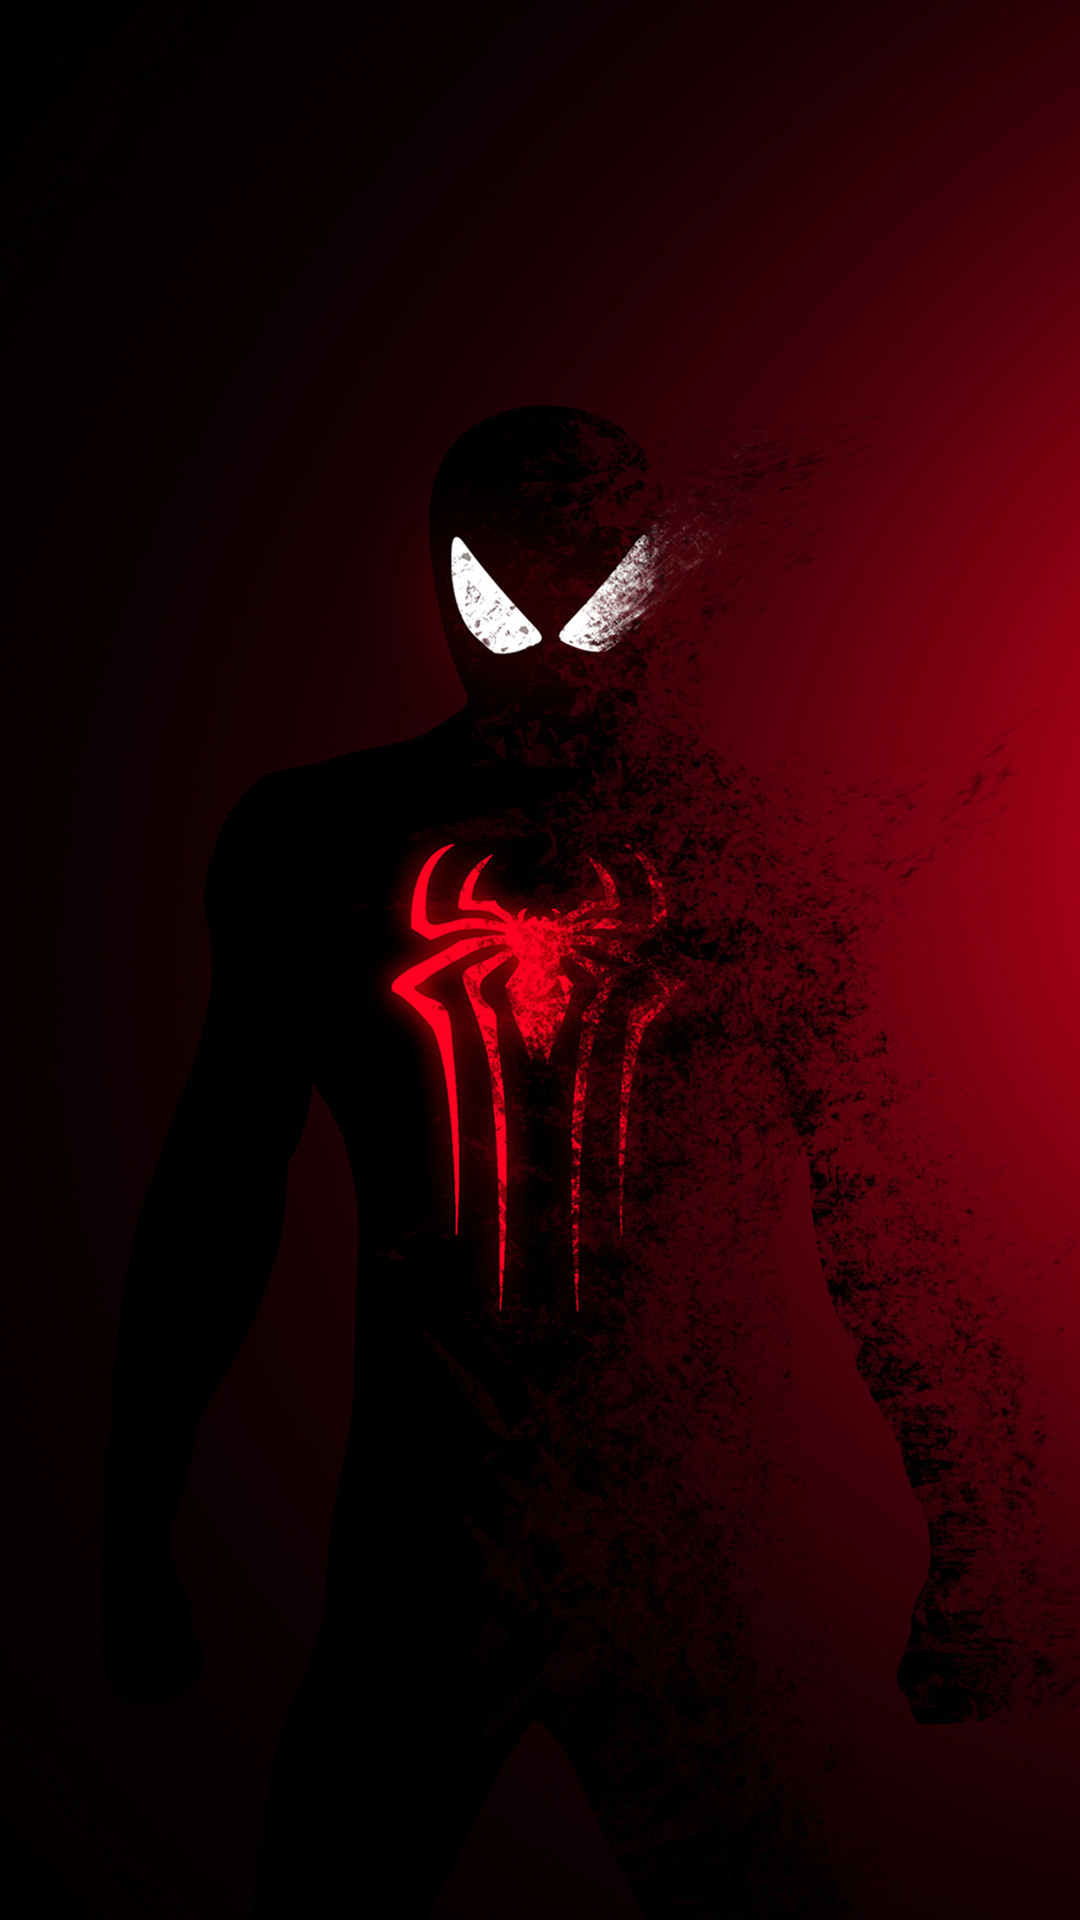 wallpaper hd download for android mobile,red,black,darkness,maroon,fictional character